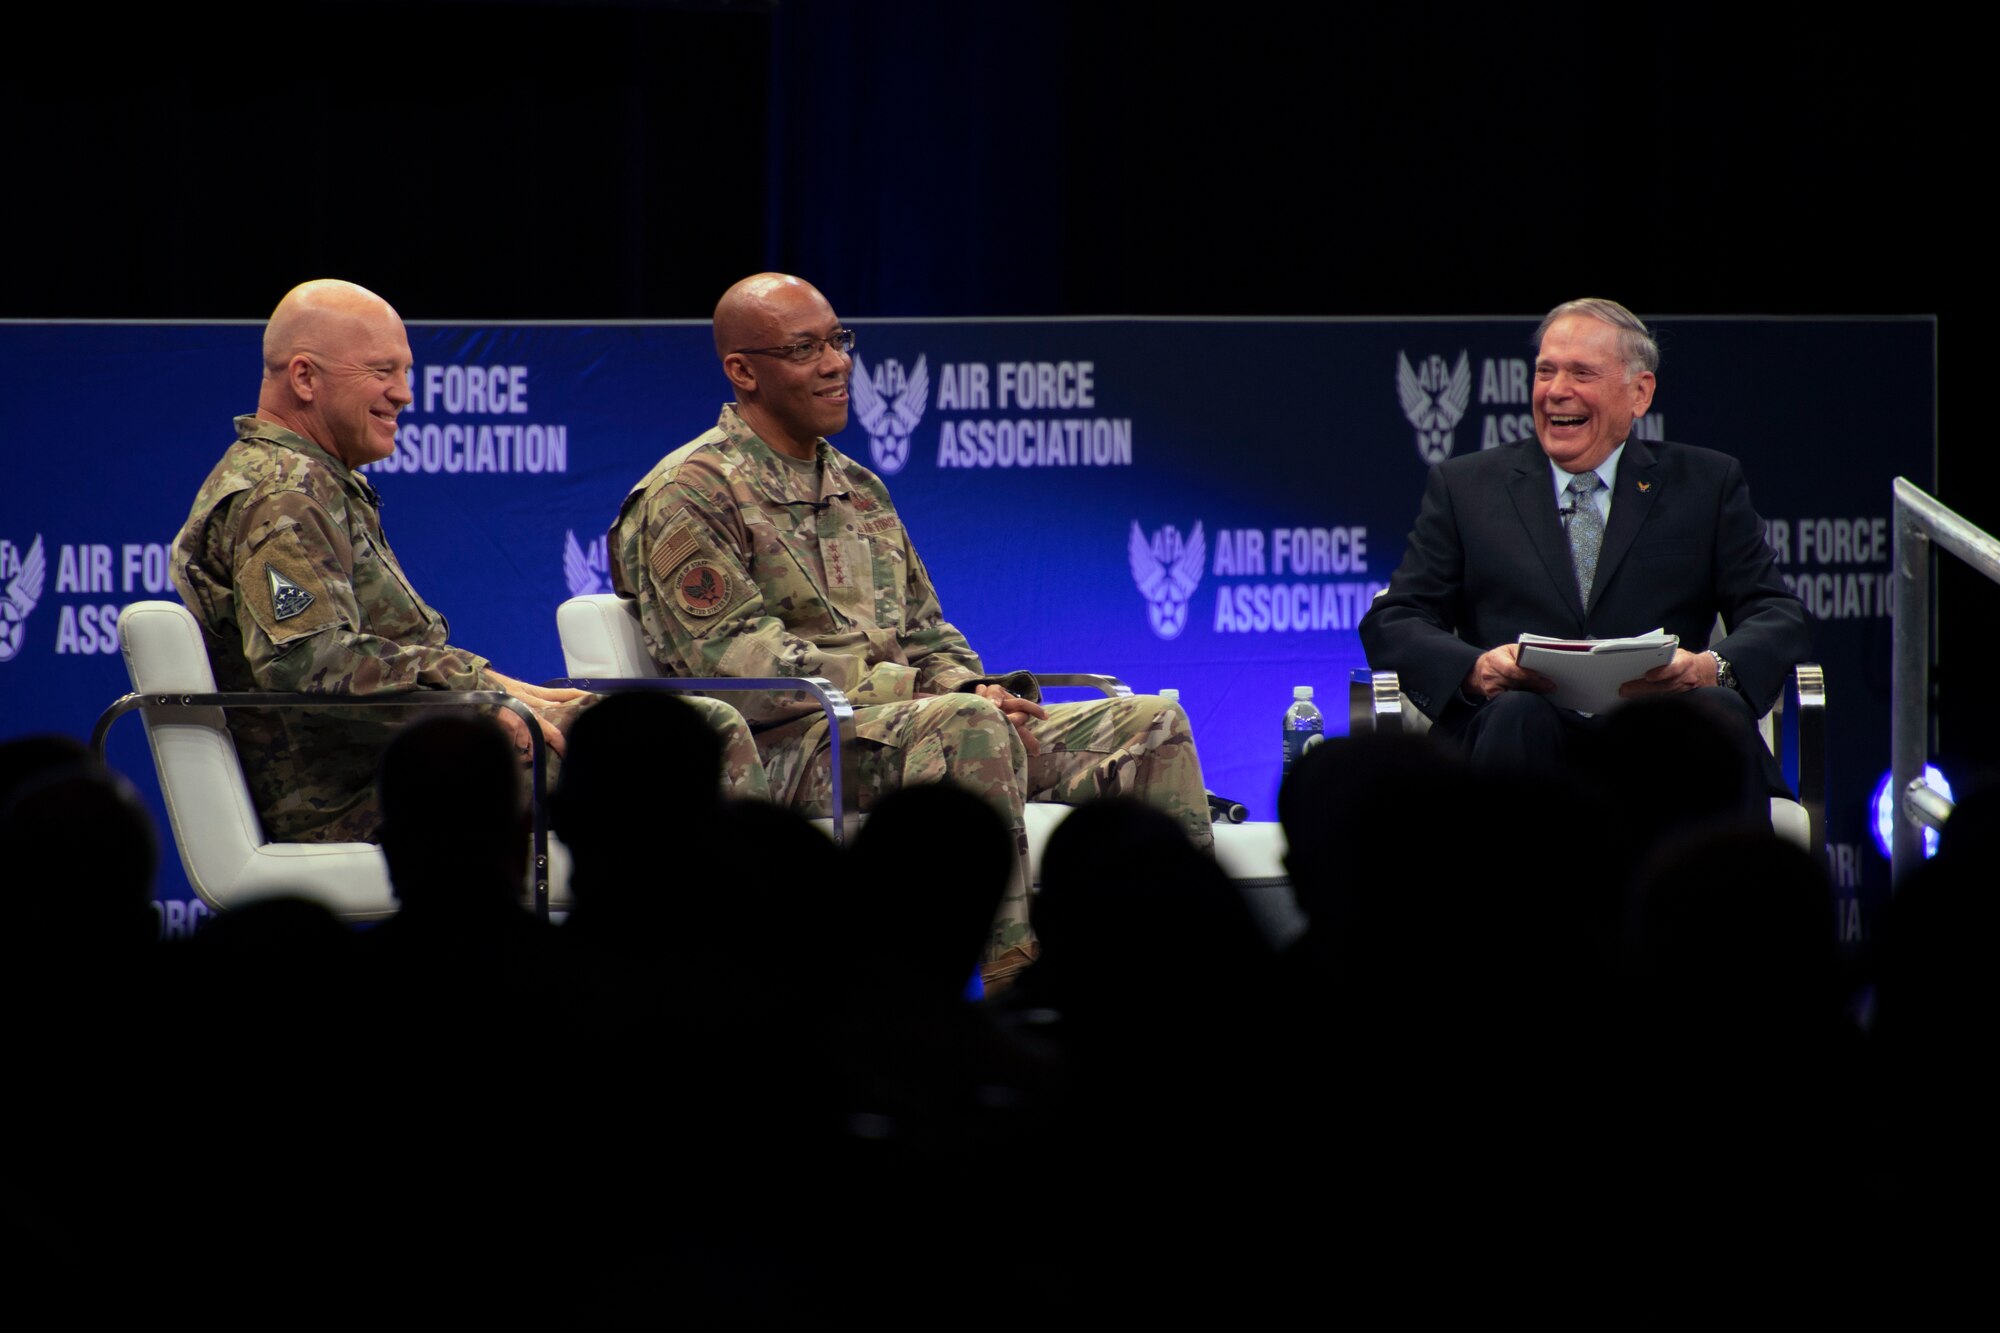 Chief of Space Operations Gen. John W. “Jay” Raymond, left, and Air Force Chief of Staff Gen. CQ Brown, Jr., center, speak at a fireside chat during the Air Force Association’s Air Warfare Symposium